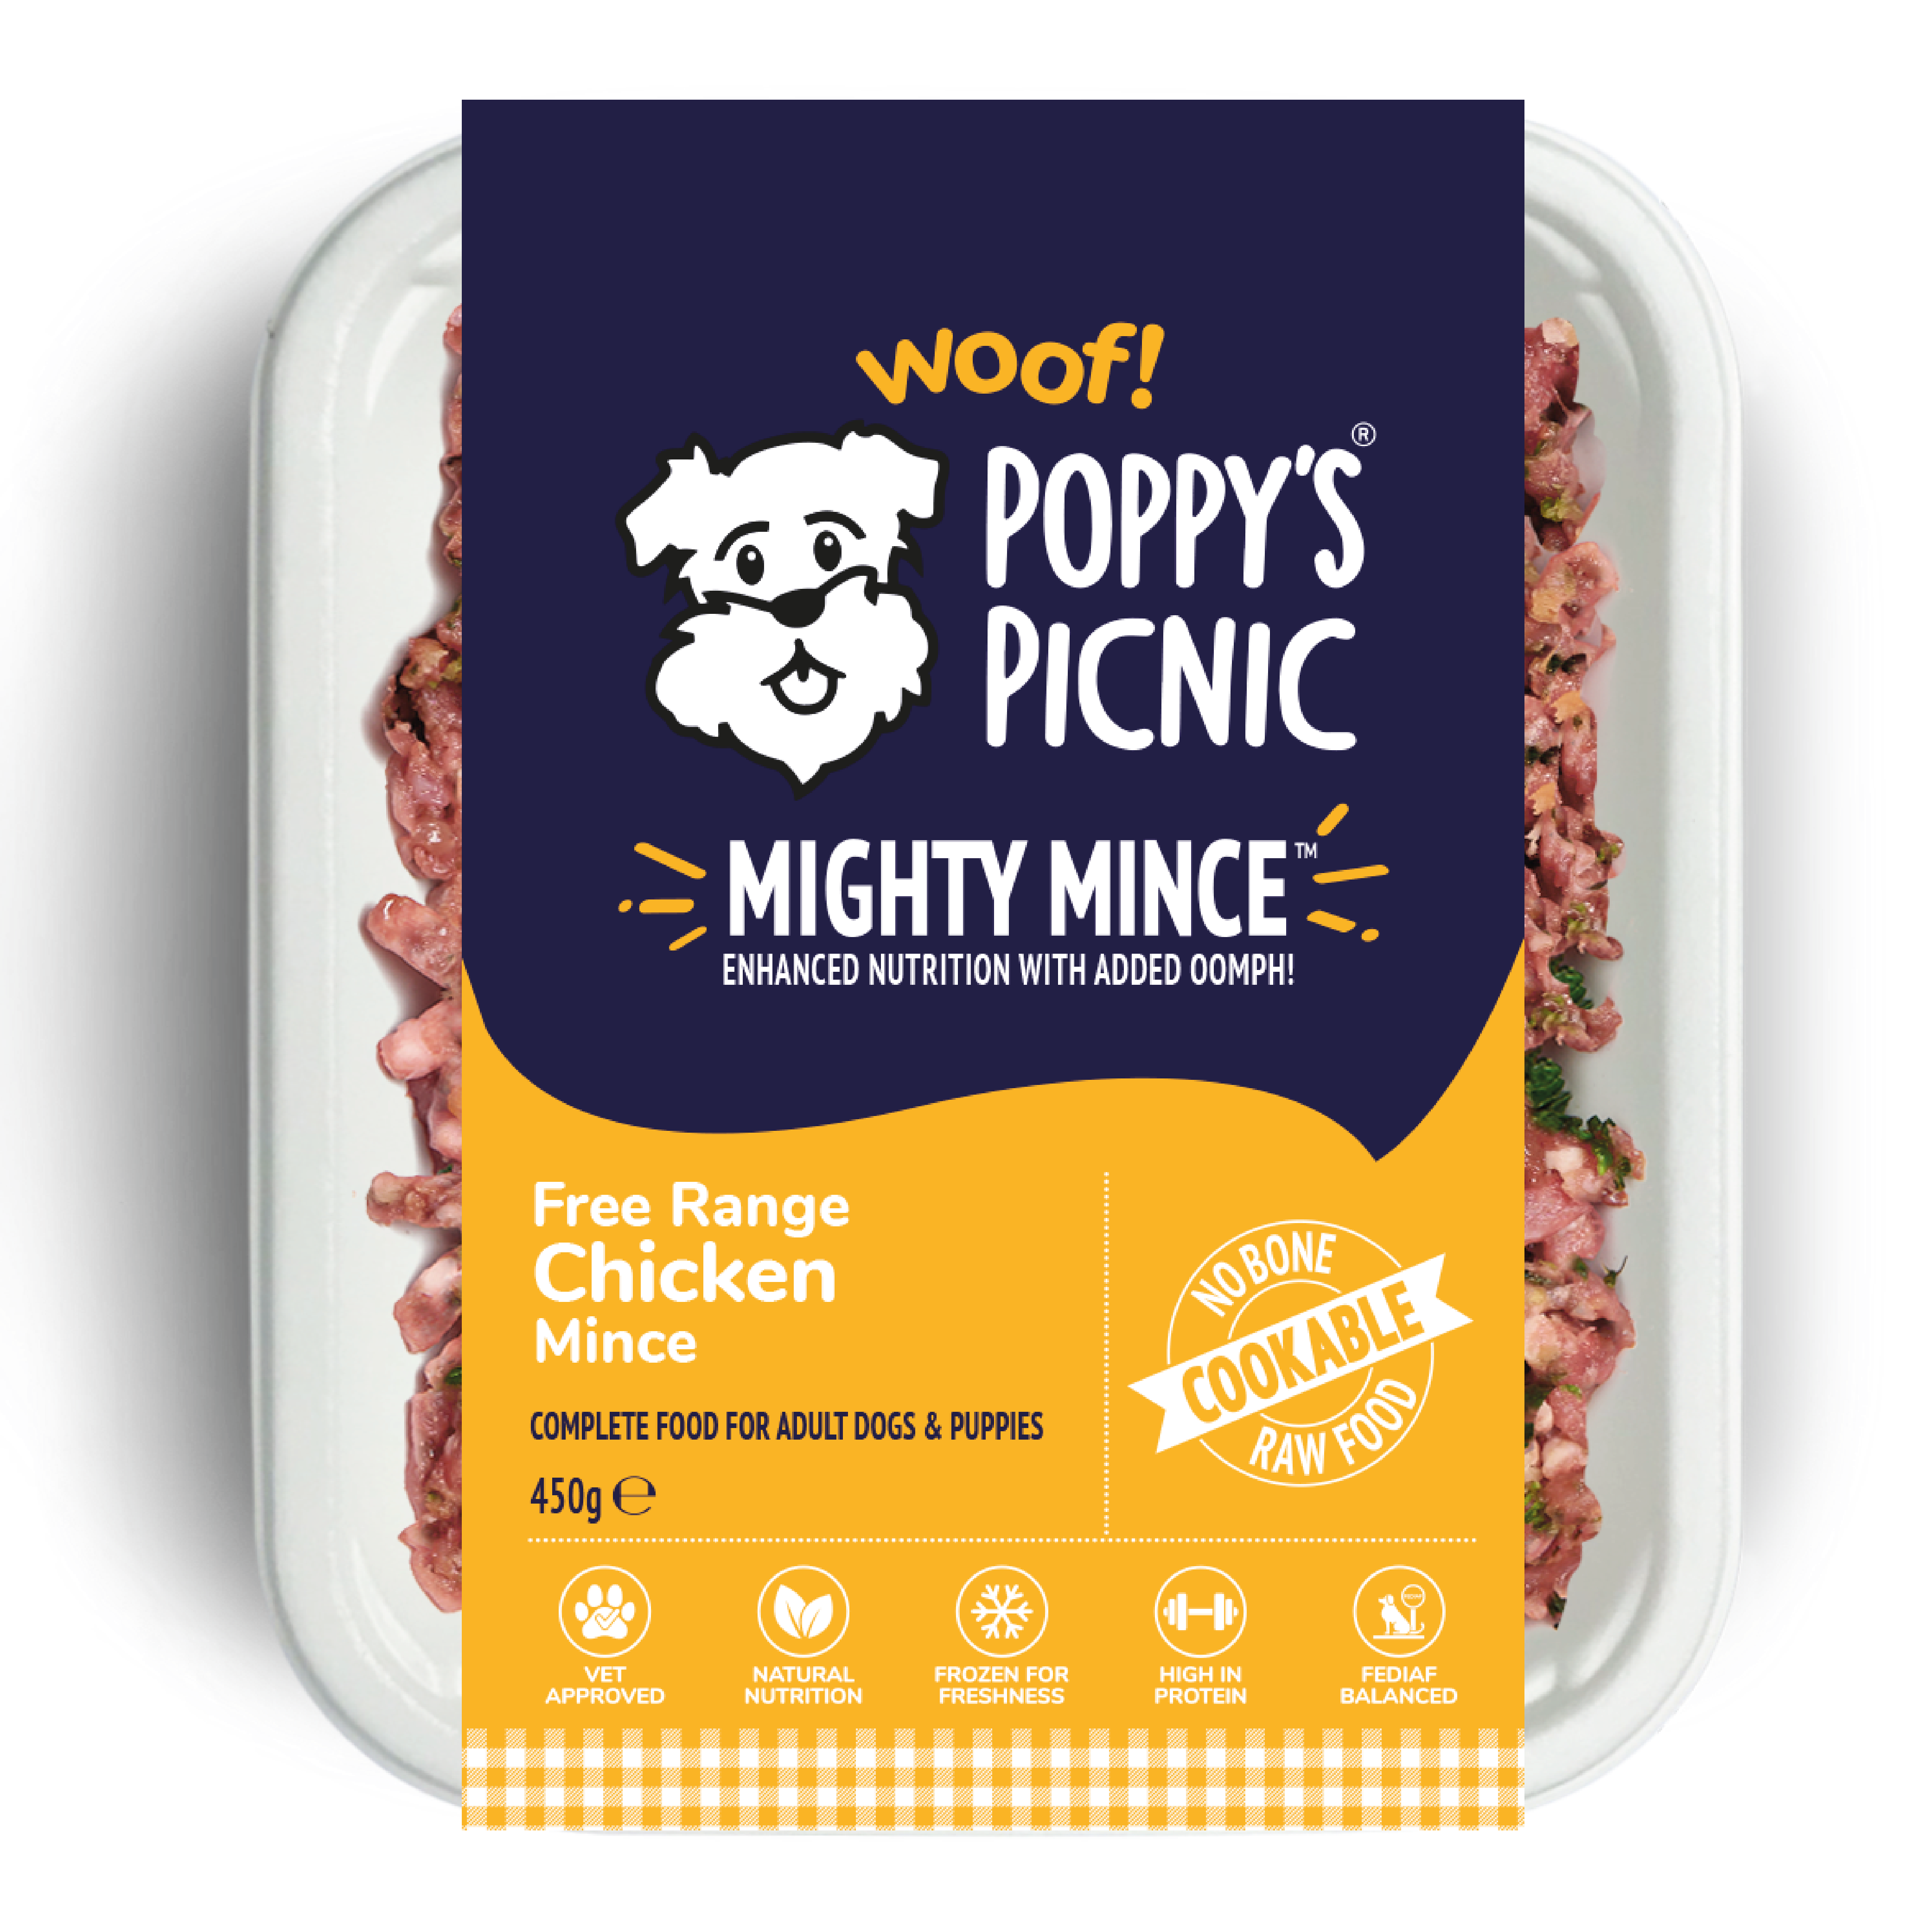 MIGHTY MINCE Chicken Box of 36